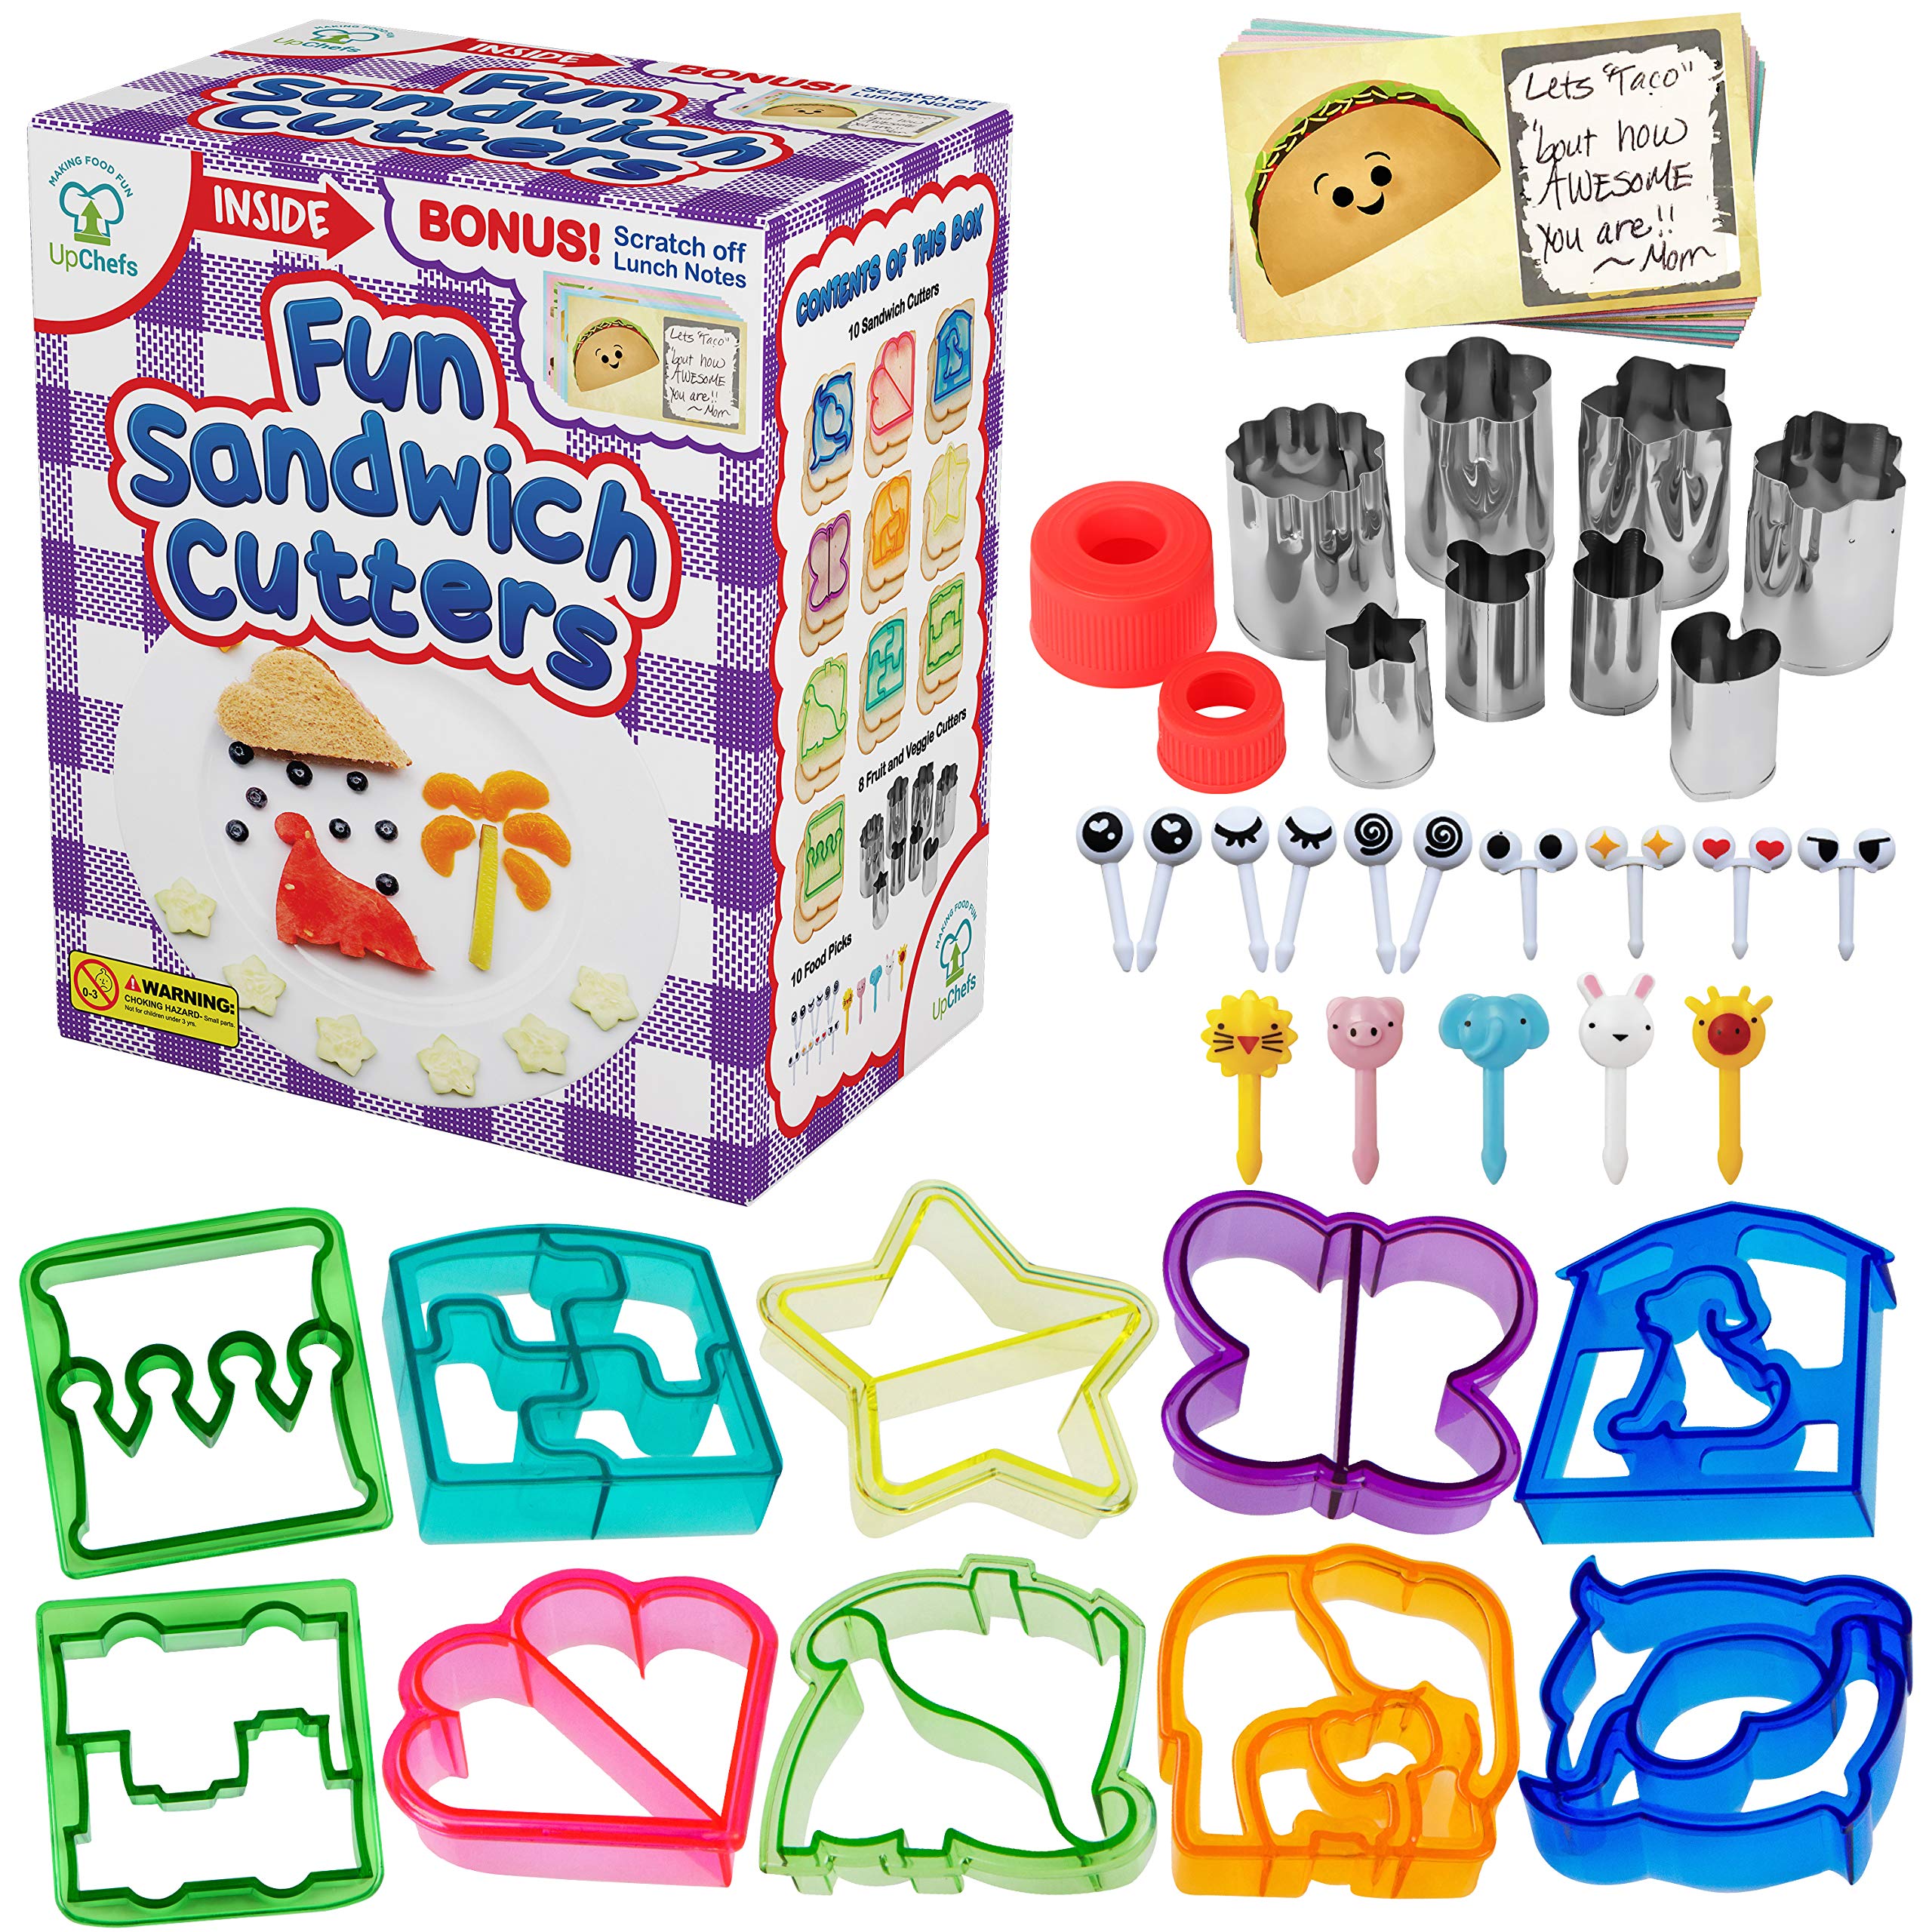 UpChefs Sandwich Cutters for kids - Create Healthy School Lunches in Minutes with These Fun Bento Lunch Box Accessories – Includes Fruit and Vegetable cookie cutters – Food Picks Plus Scratch Notes